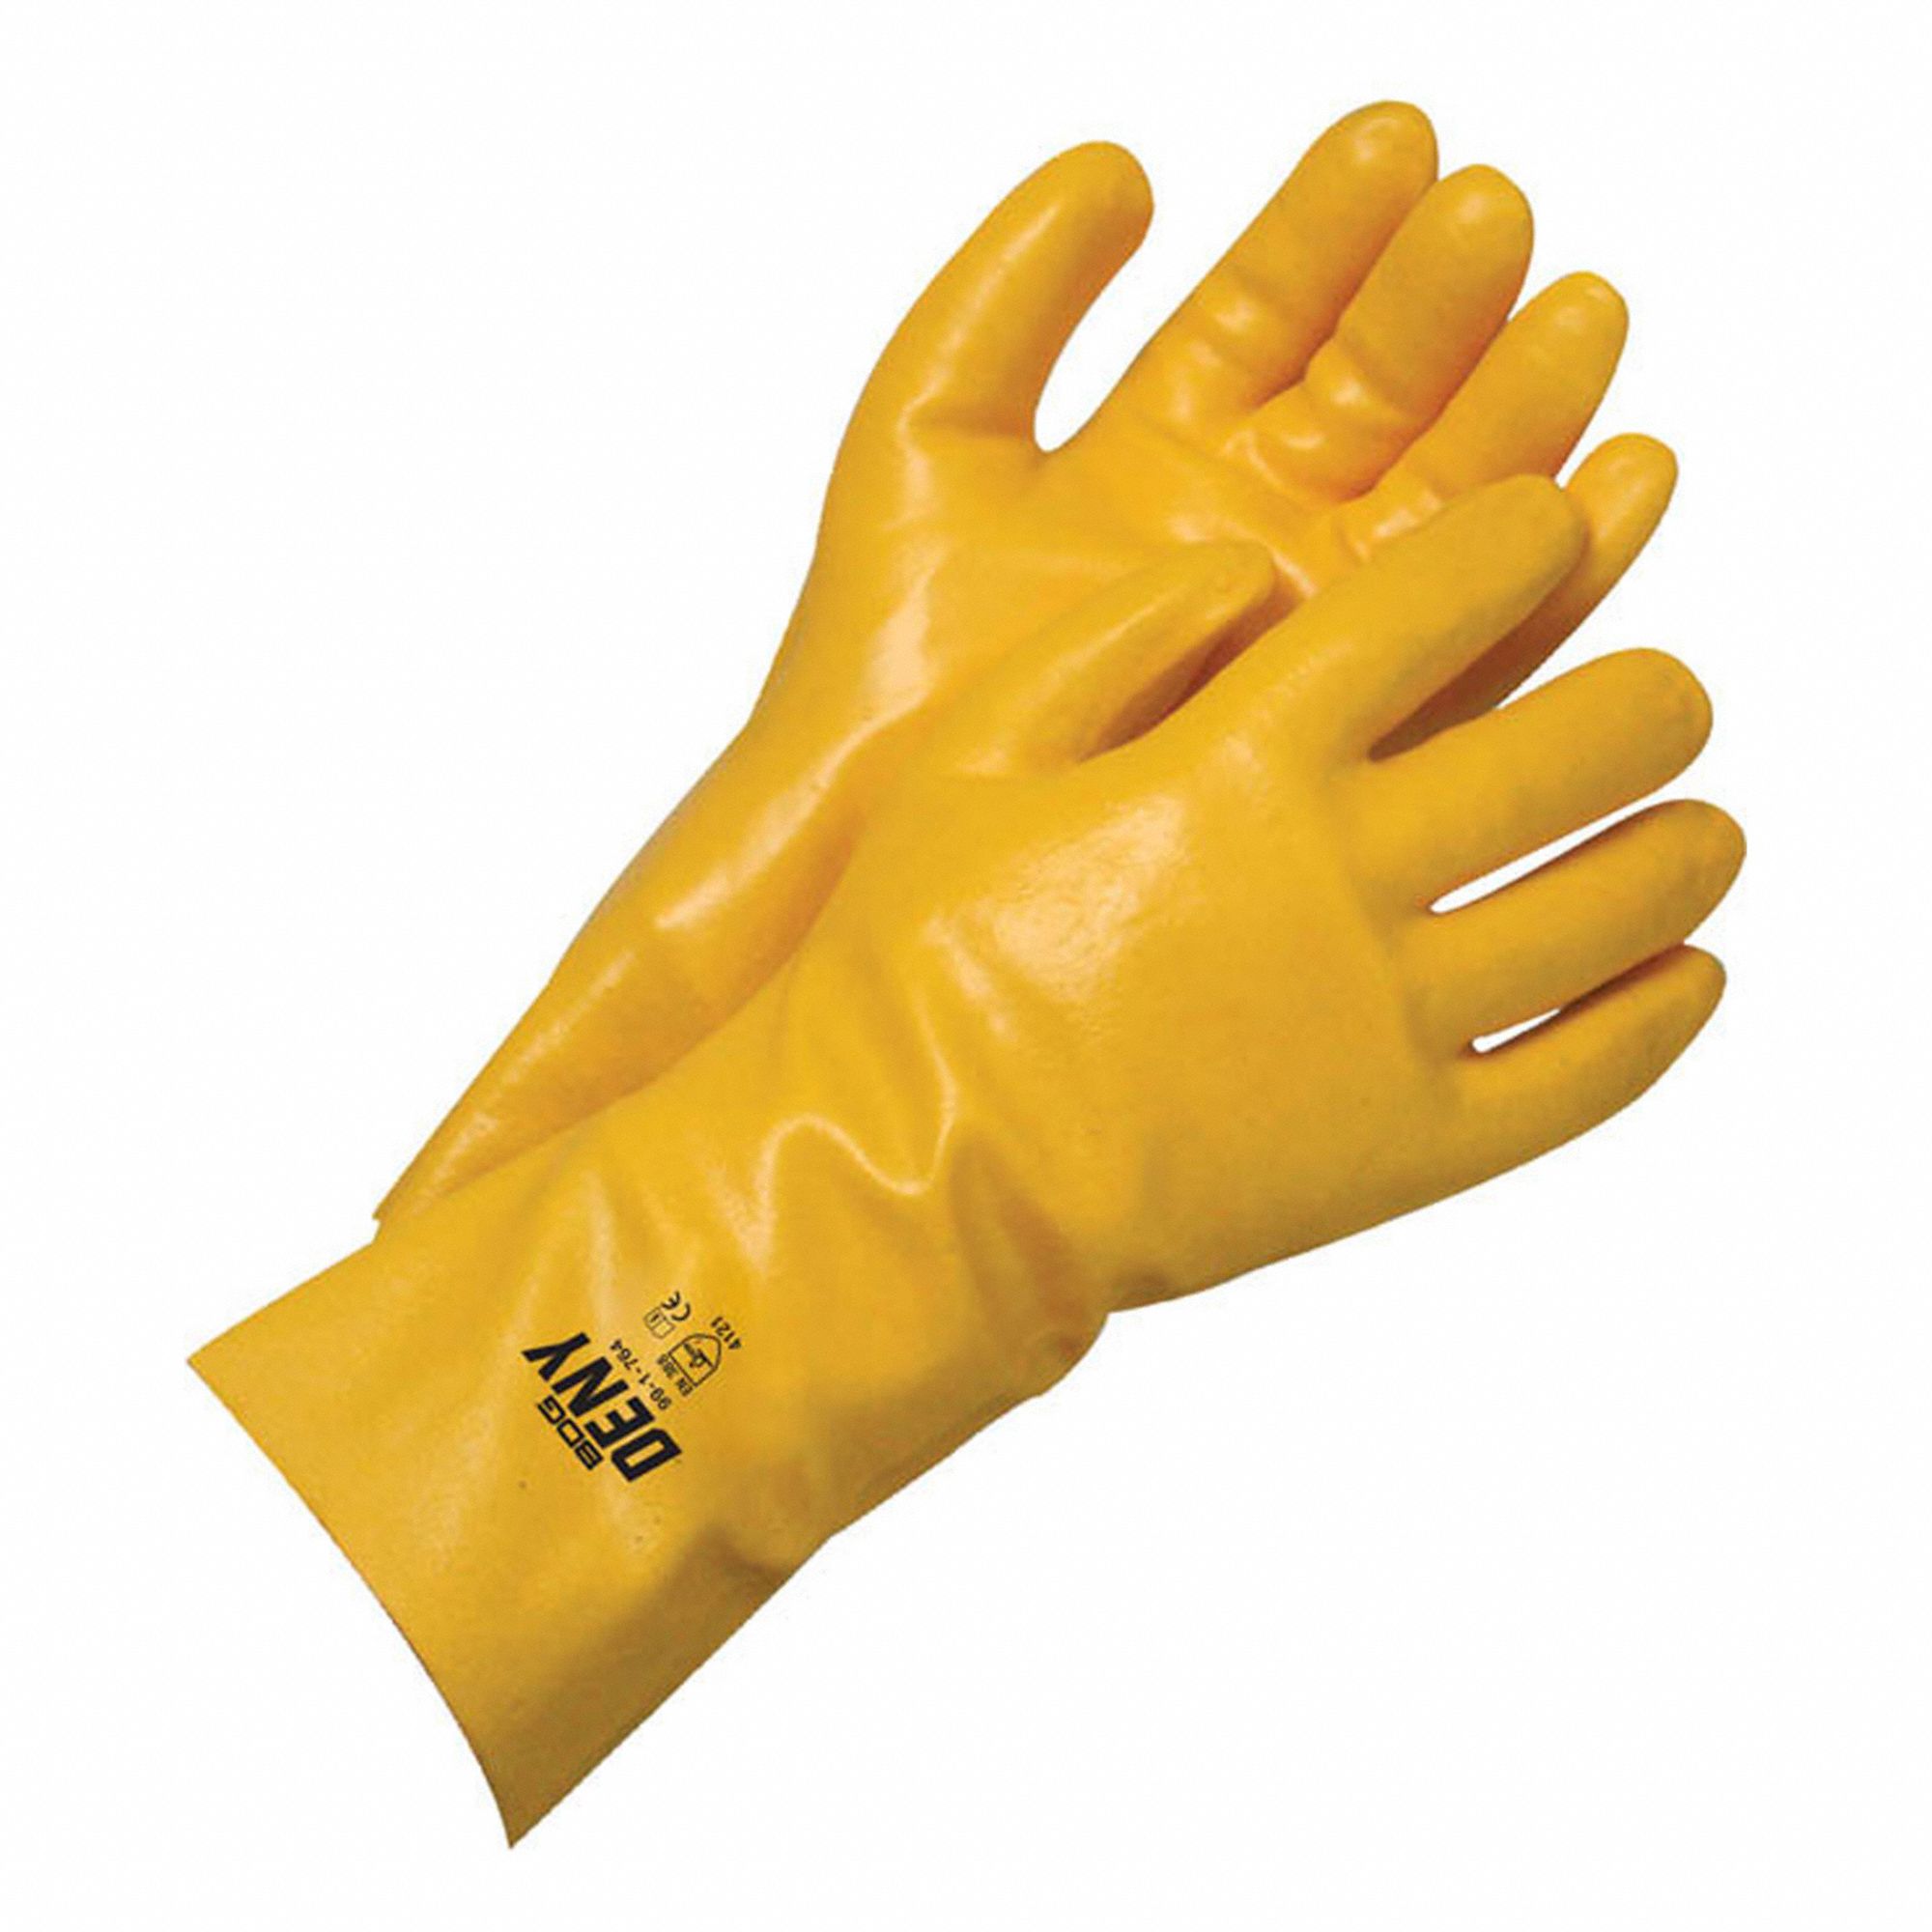 DENY CHEMICAL-RESISTANT GLOVES, YELLOW, UNIVERSAL, PVC, GAUNTLET CUFF, EN  388-4121